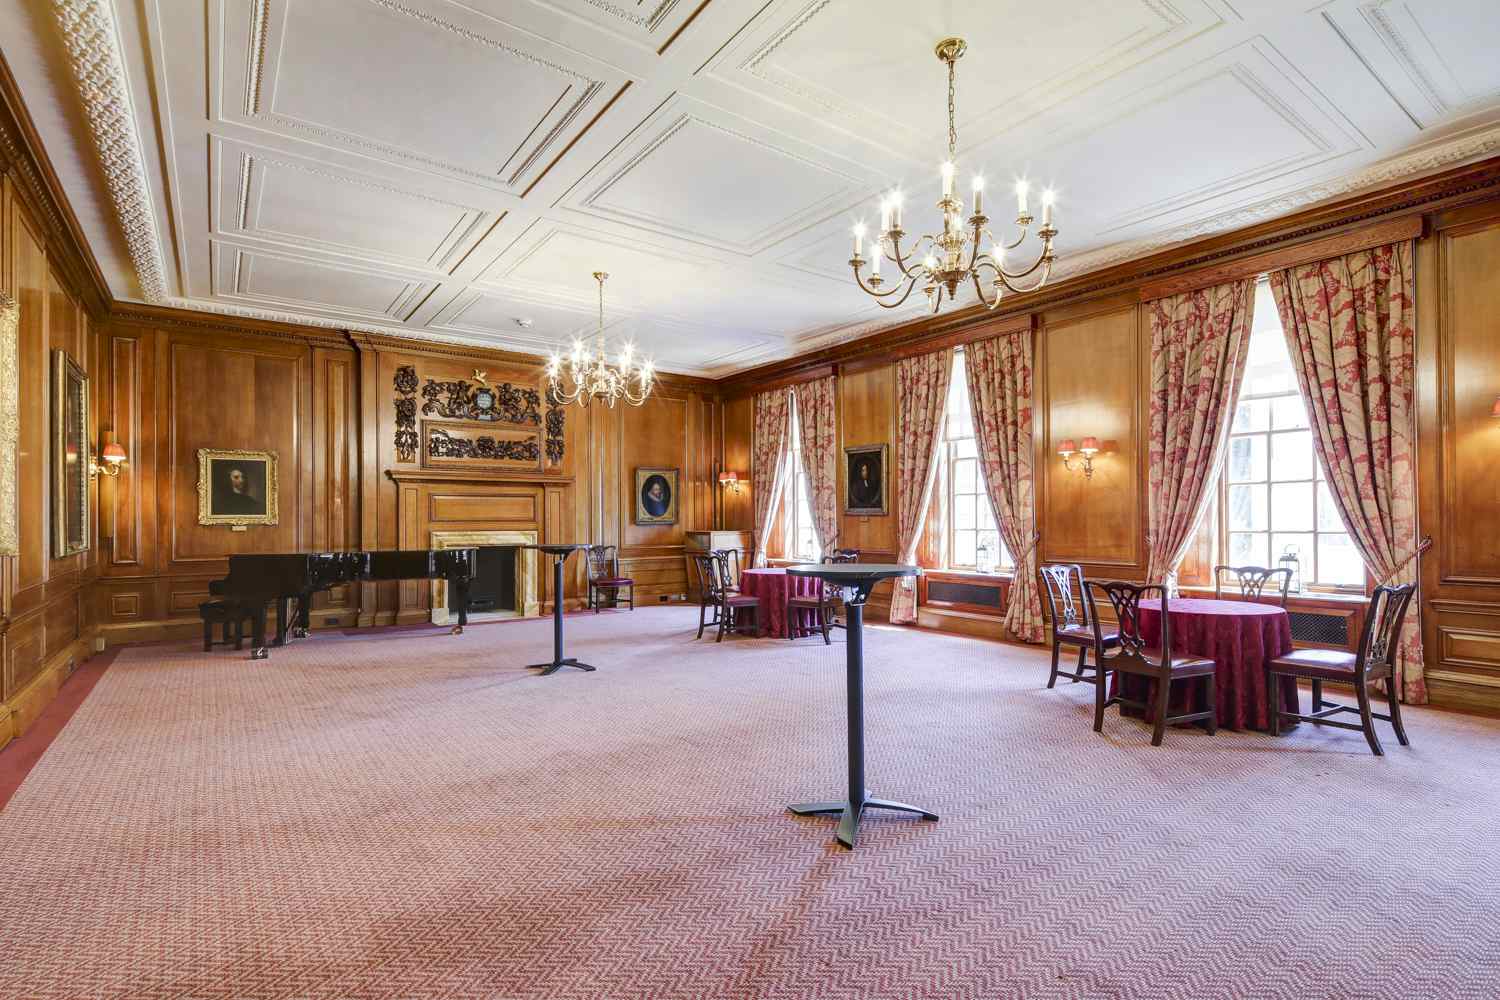 Parliament Chamber, The Inner Temple